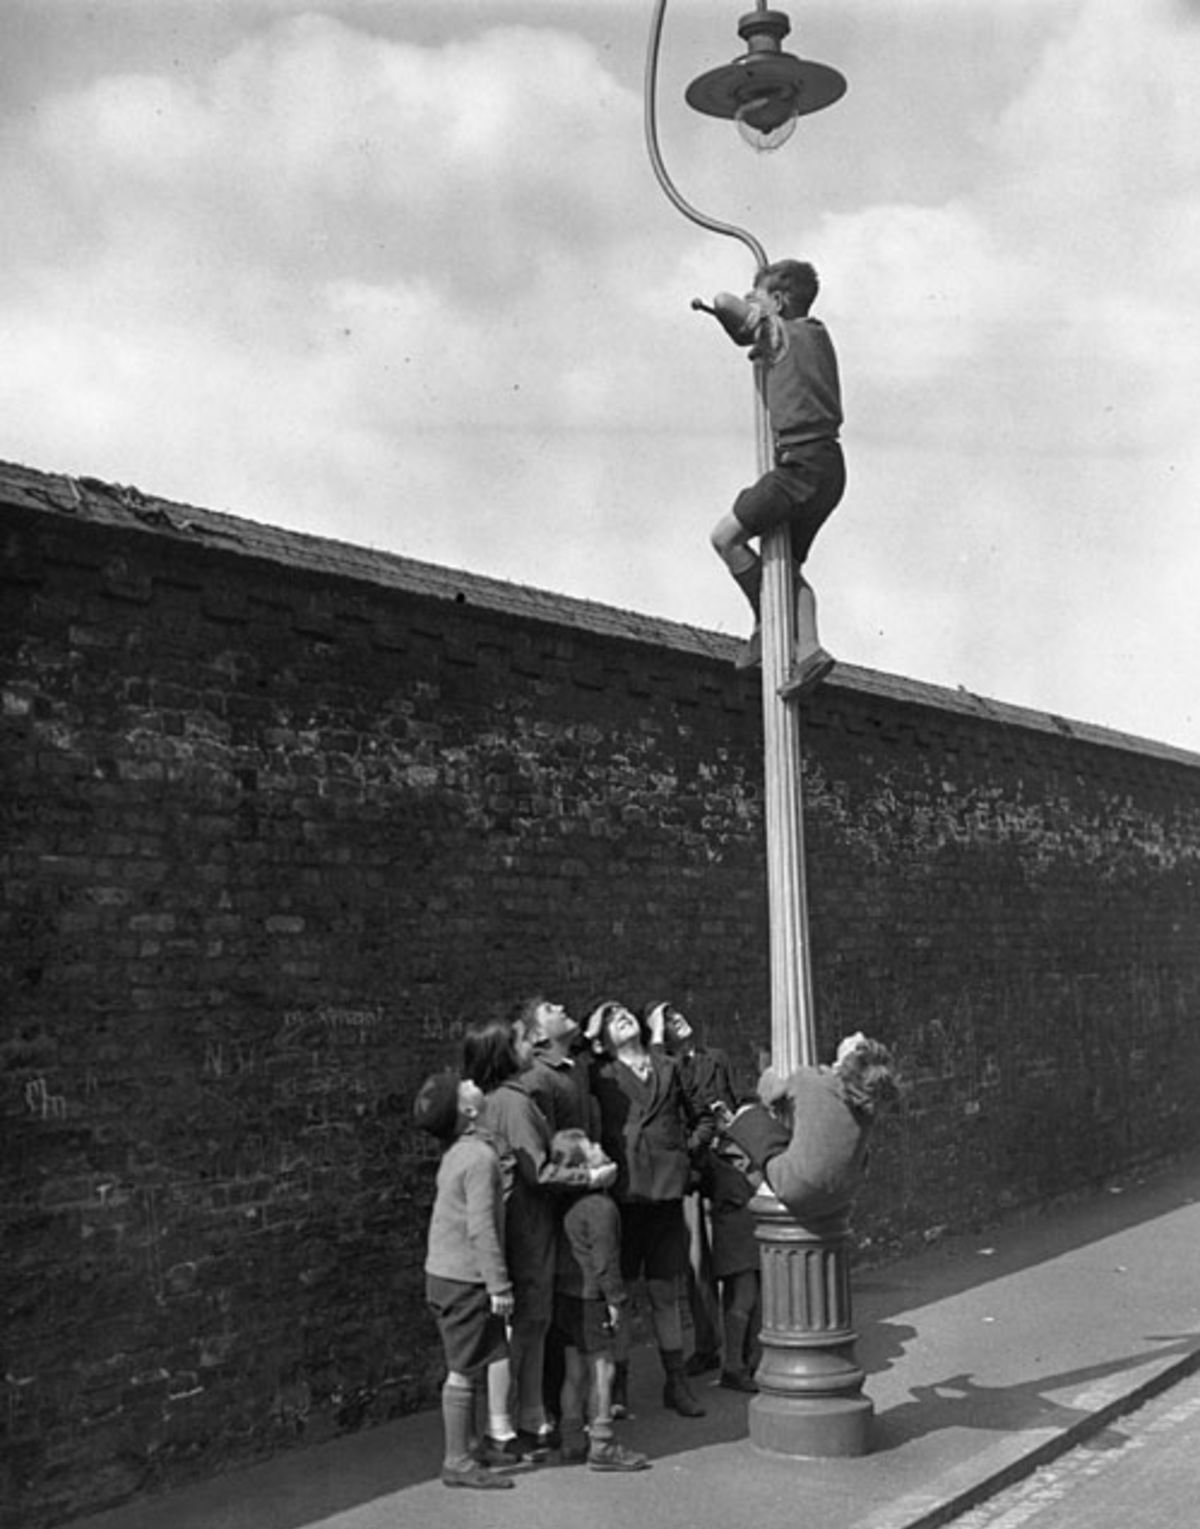 A boy watches from the top of a lamppost, while his friends wait below for a commentary, Surrey v Australians, 1st day, The Oval, May 21, 1938